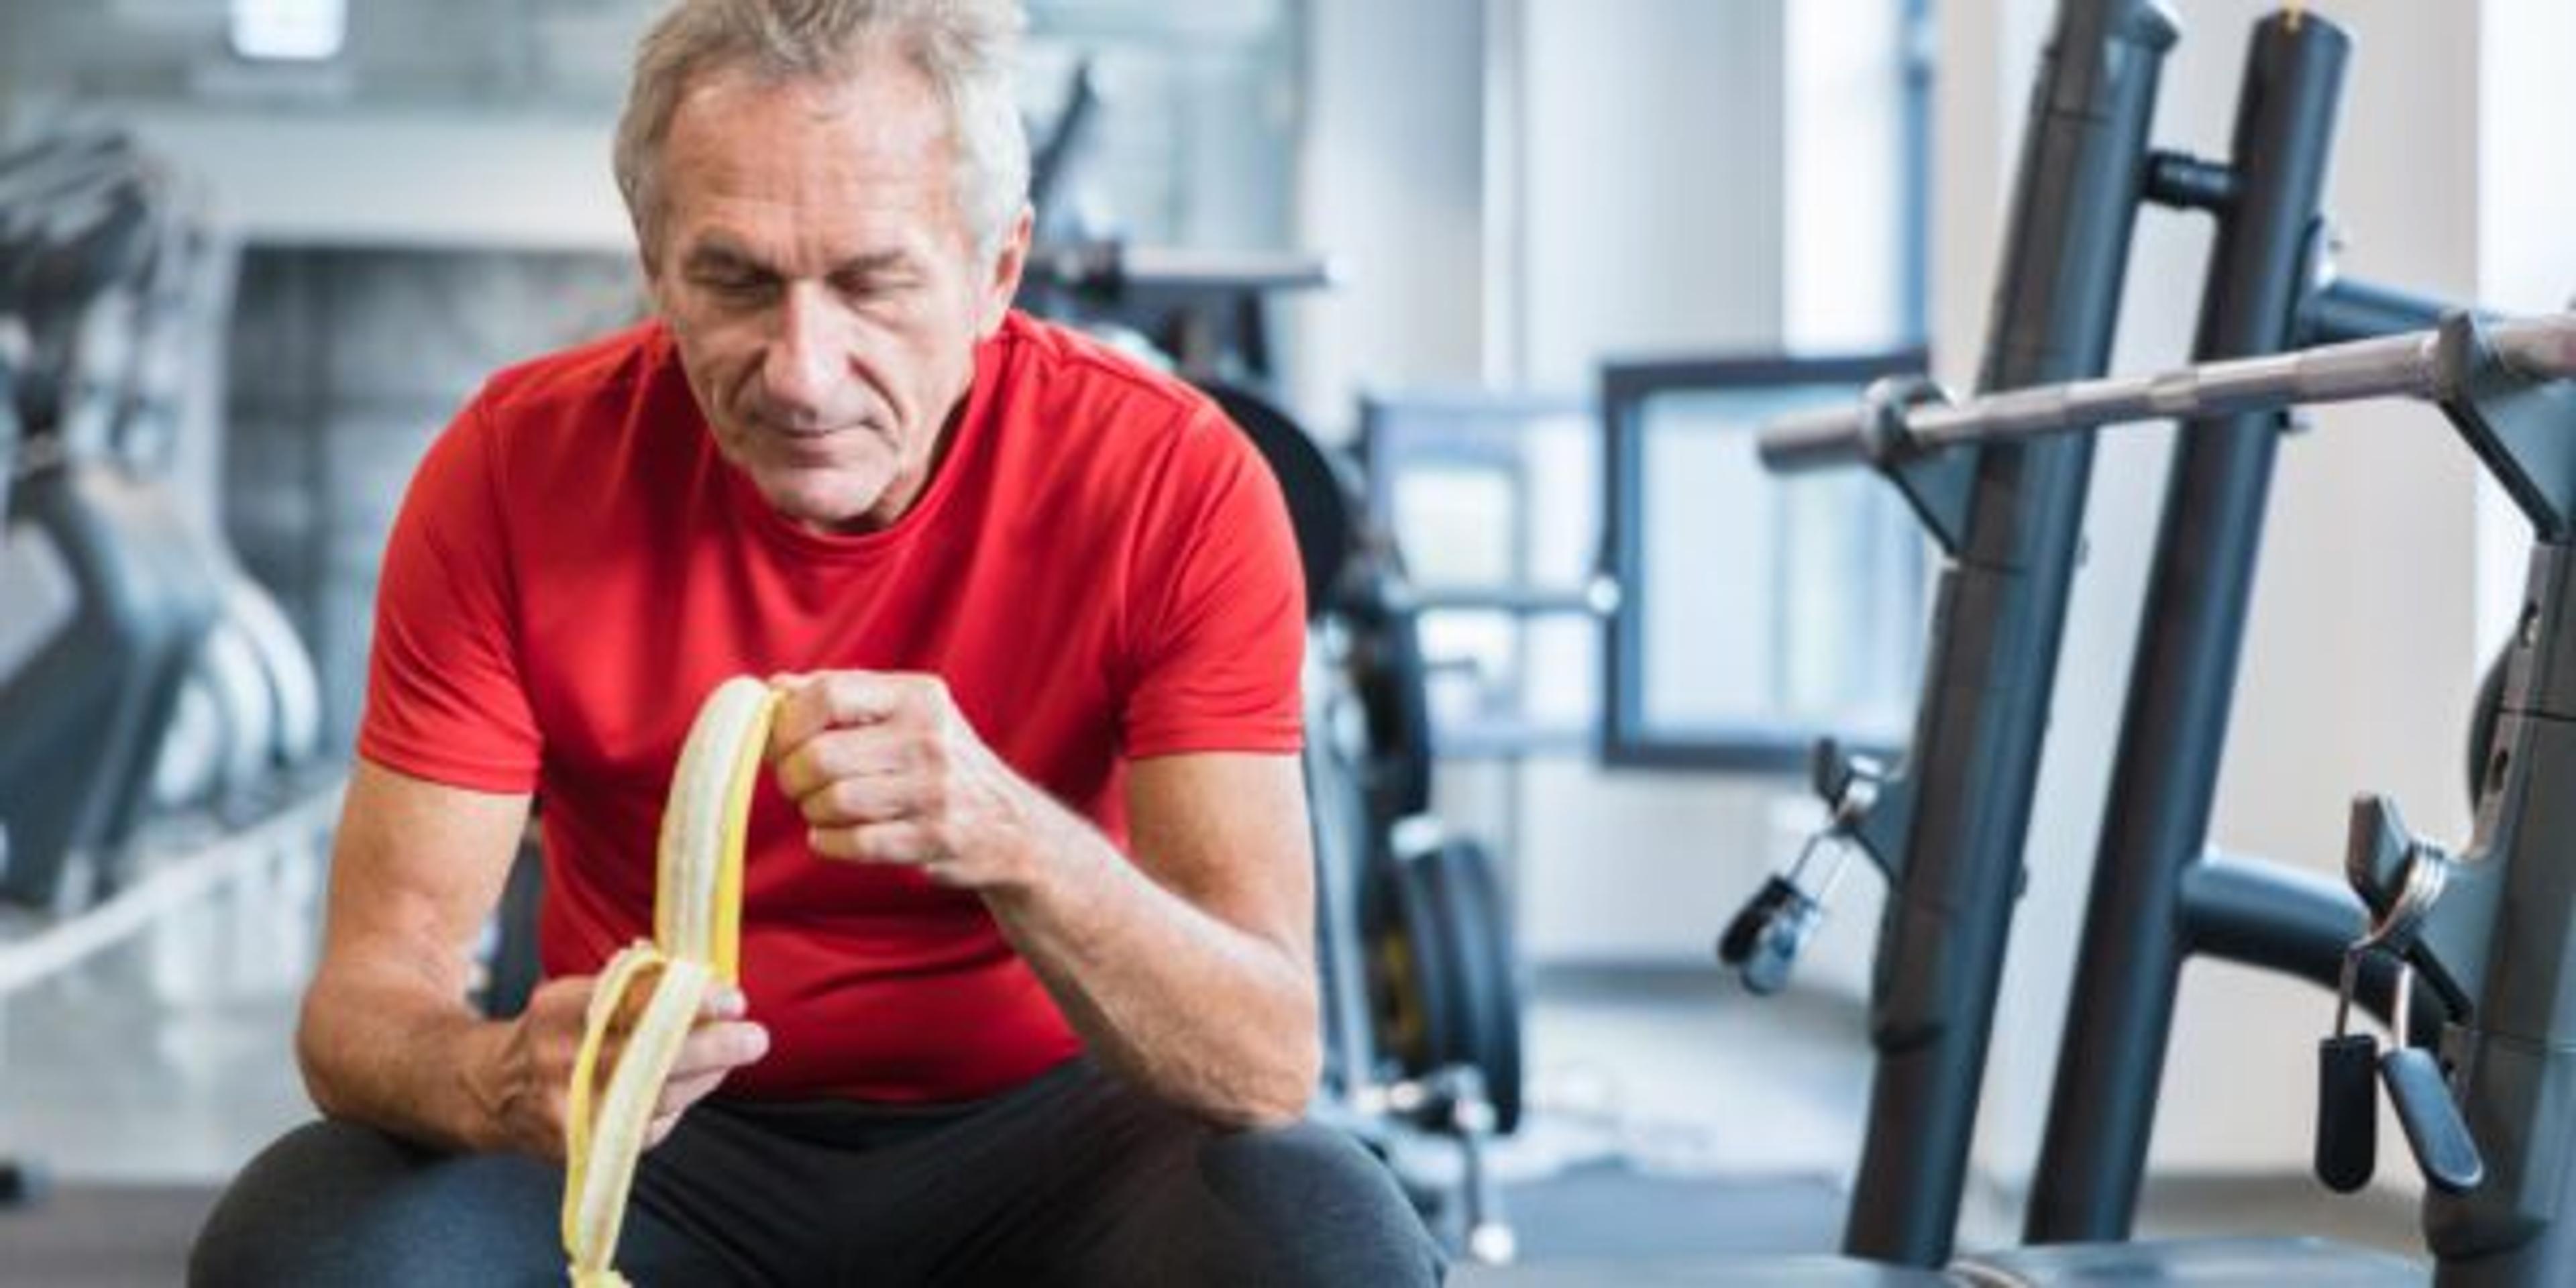 A man eats a banana while sitting on a weight bench at the gym.